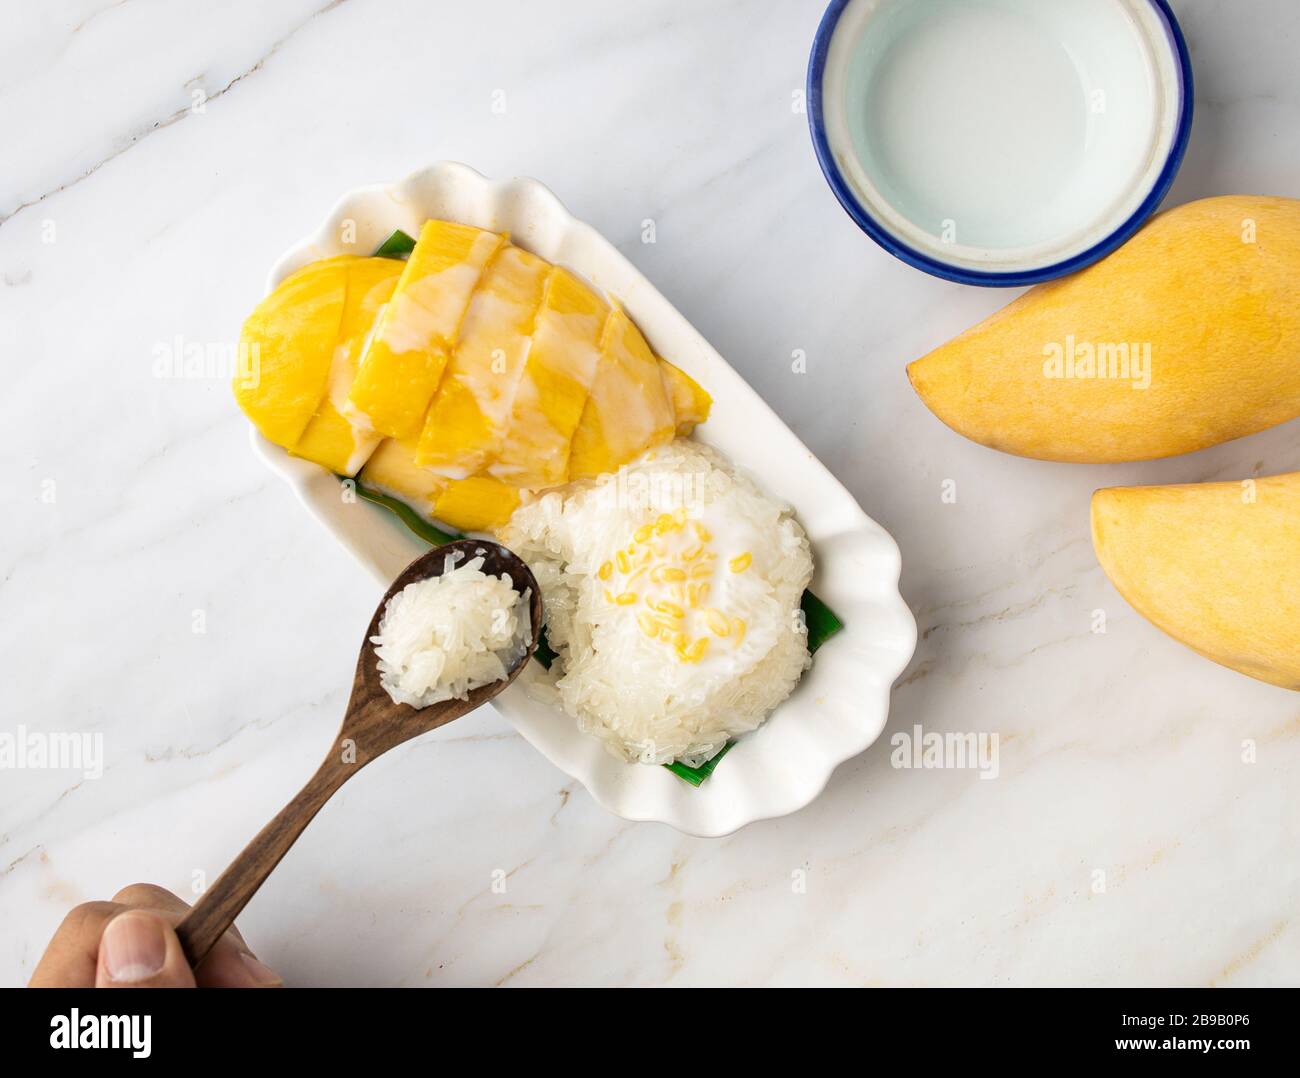 This is the picture of Mangoes Sticky Rice with Coconut Milk on Mable Stock Photo